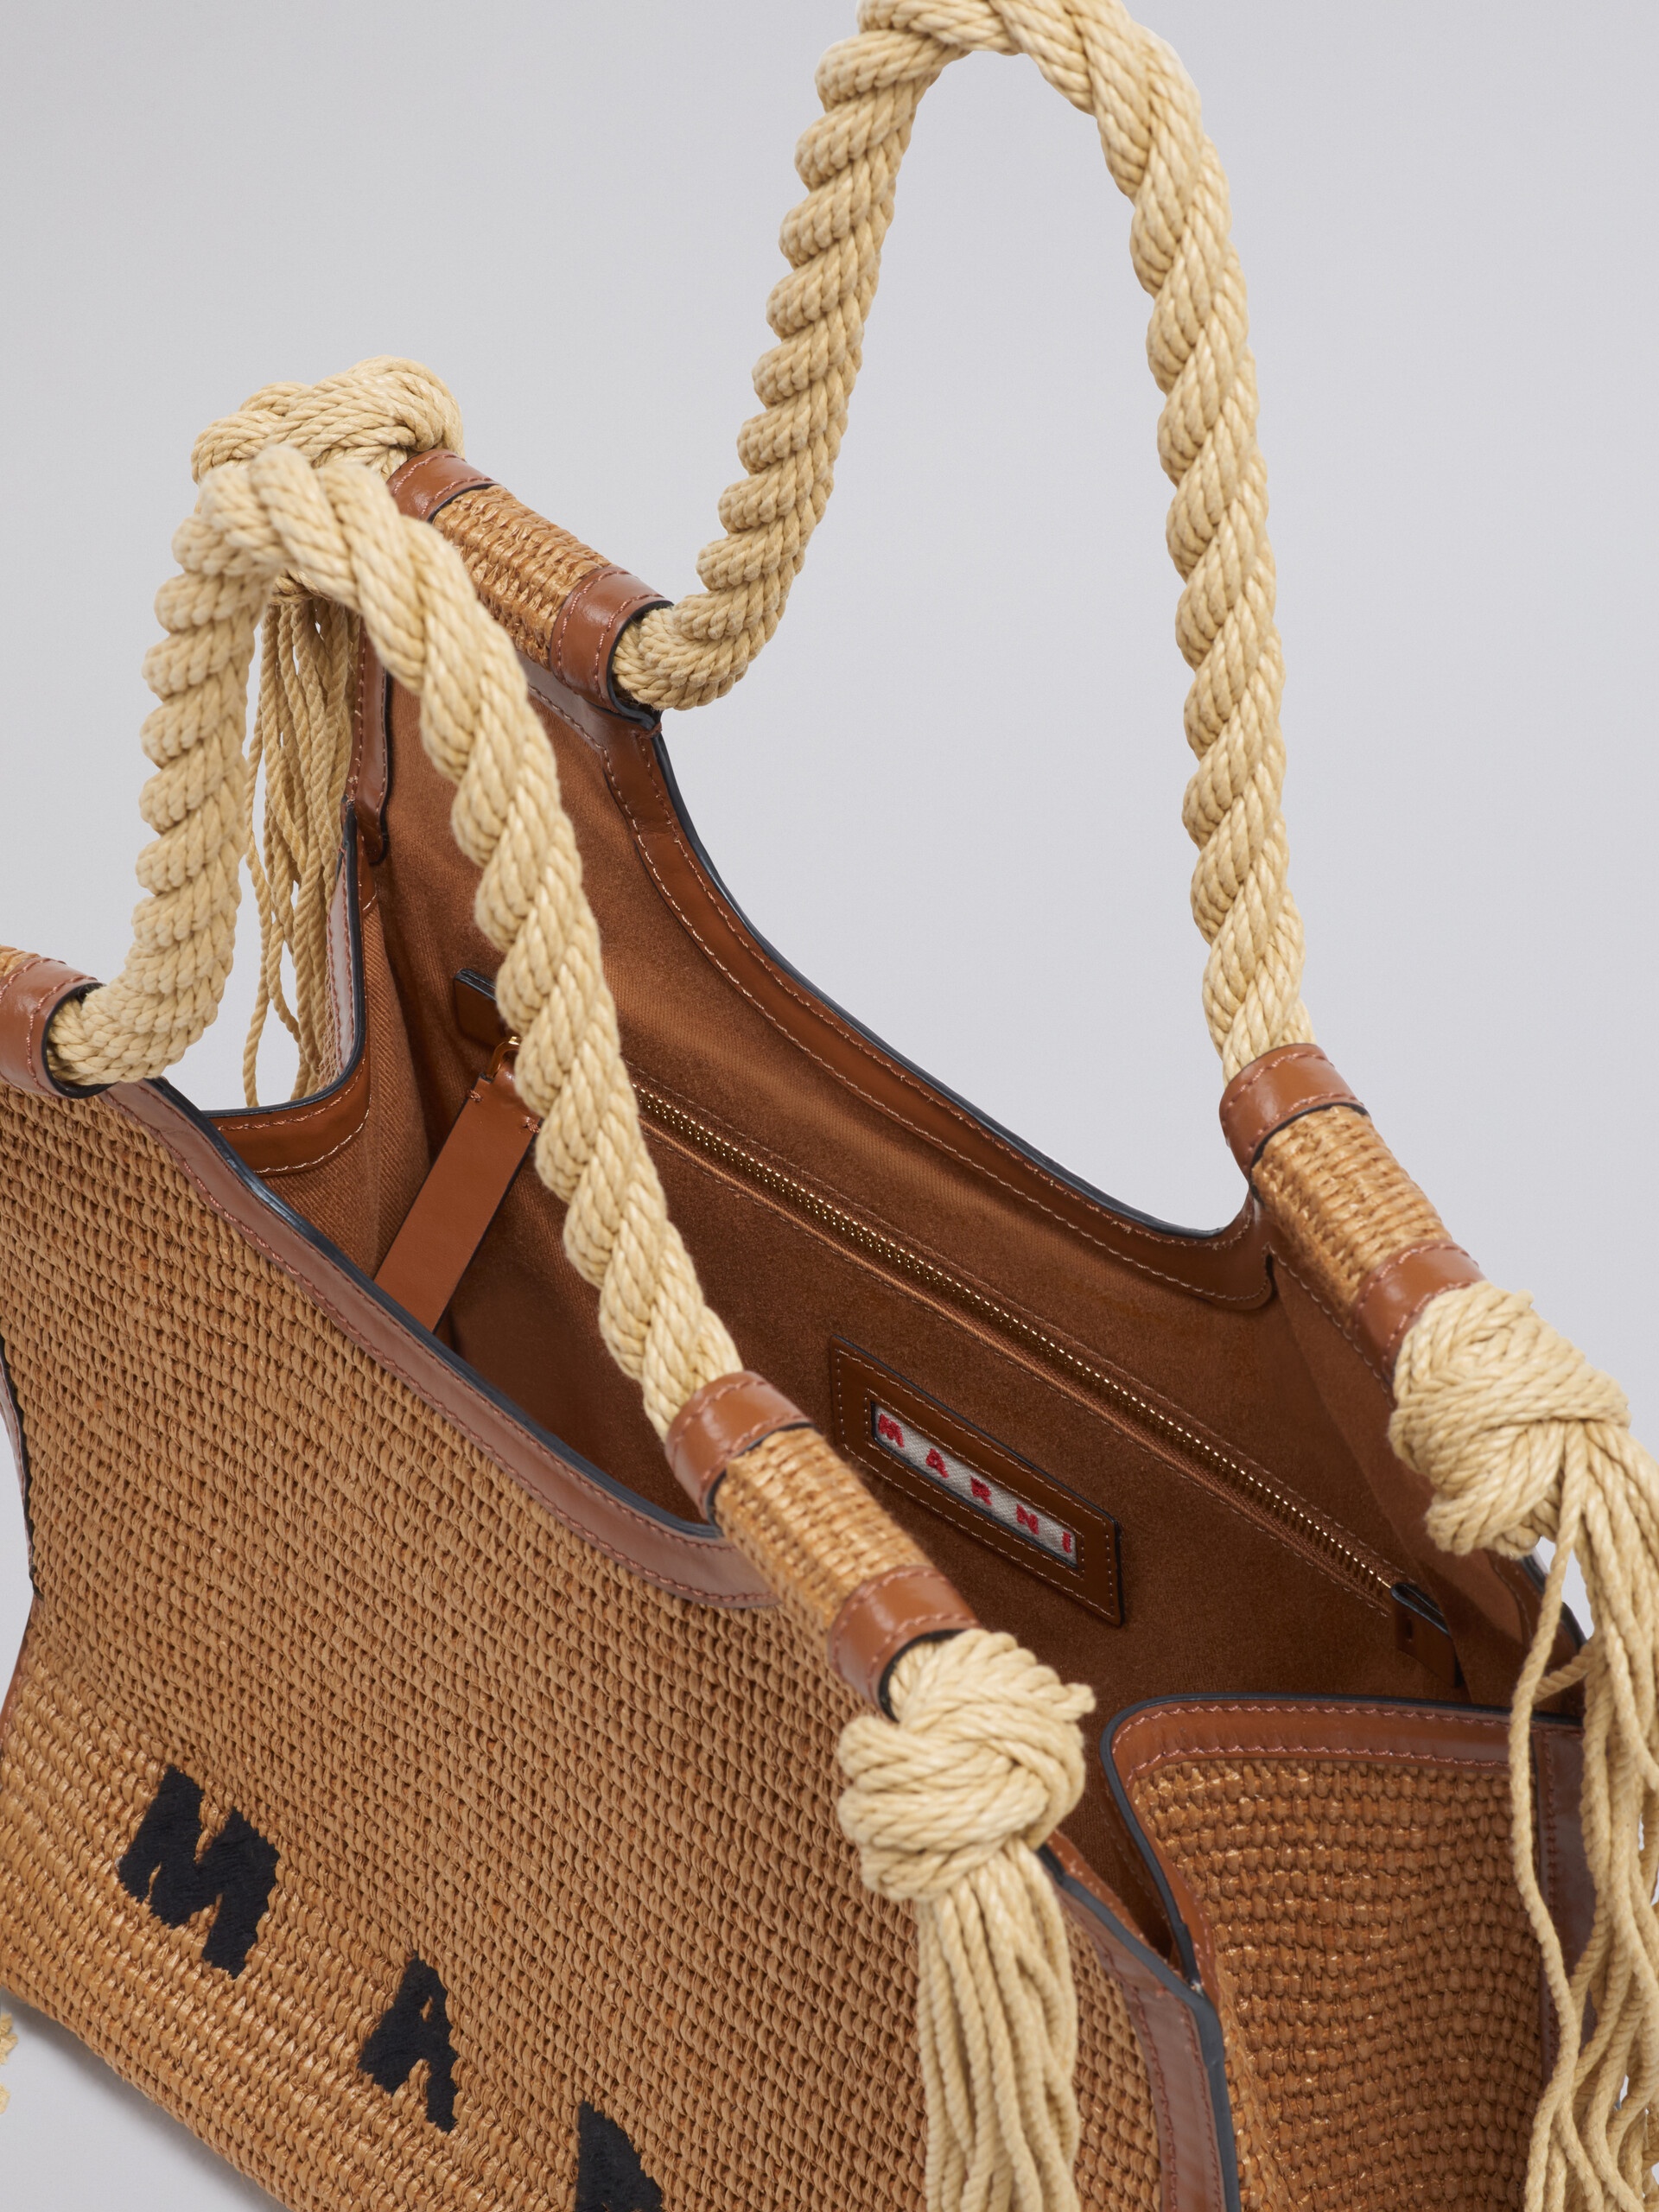 EAST-WEST MATTING SHOPPING BAG WITH FRAYED ROPE HANDLES - 3